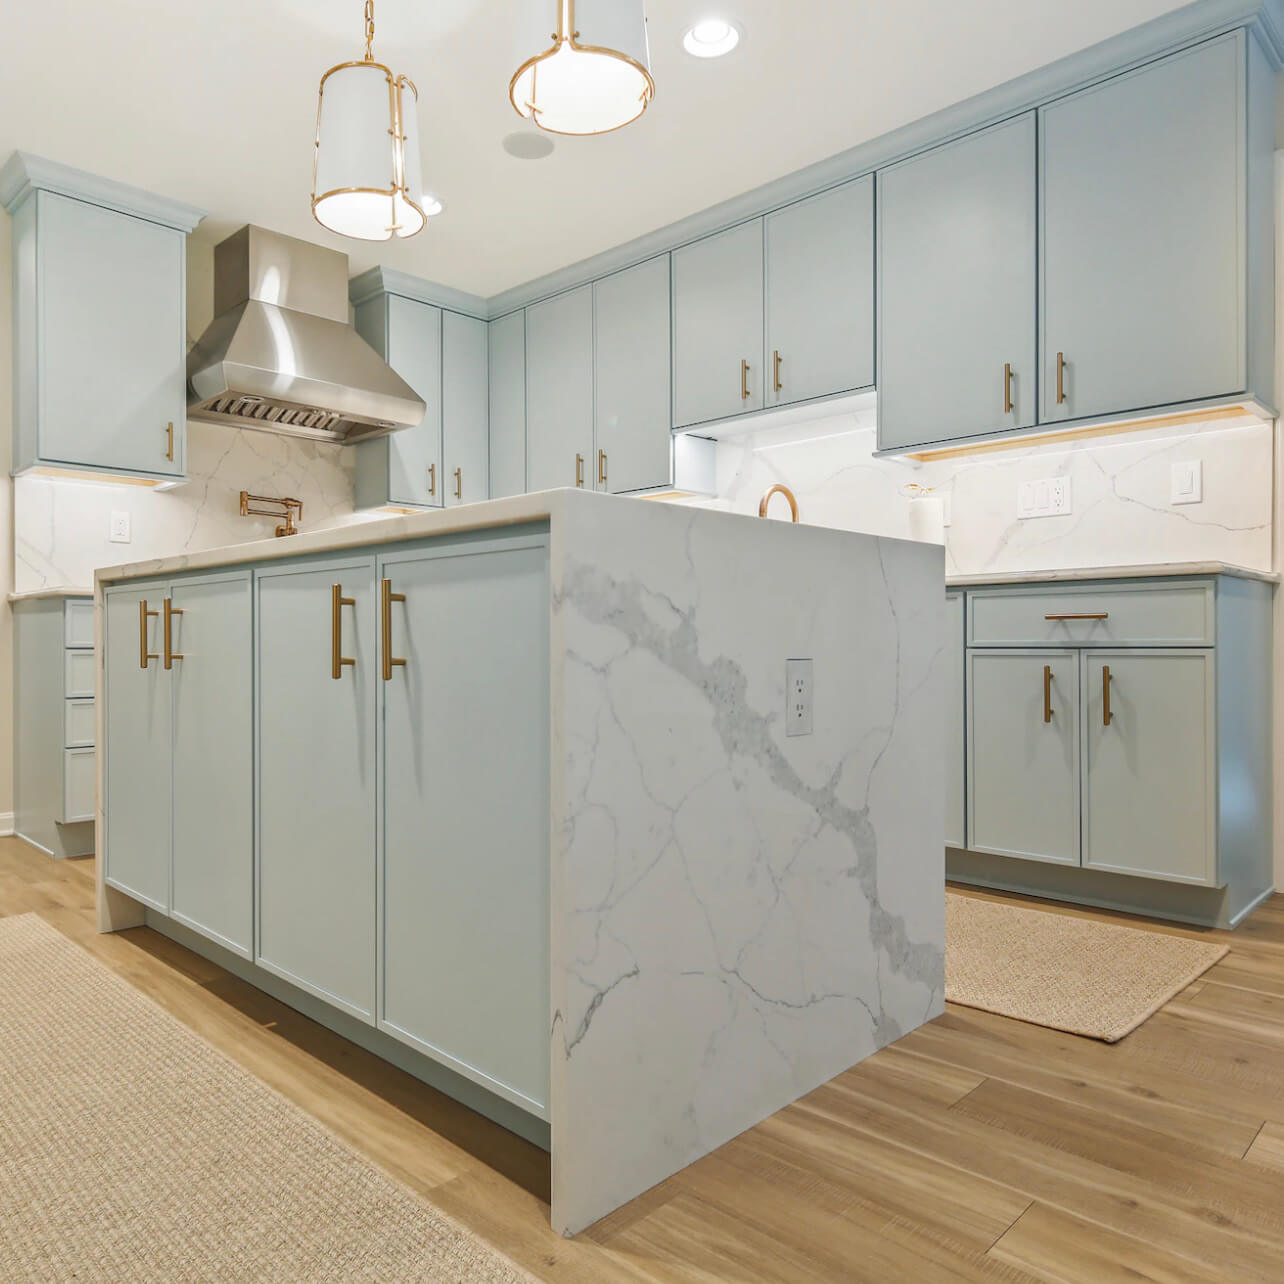 A modern kitchen with a skinny shaker door style in a light, sky blue paint color called Little Boy Blu from Benjamin Moore.